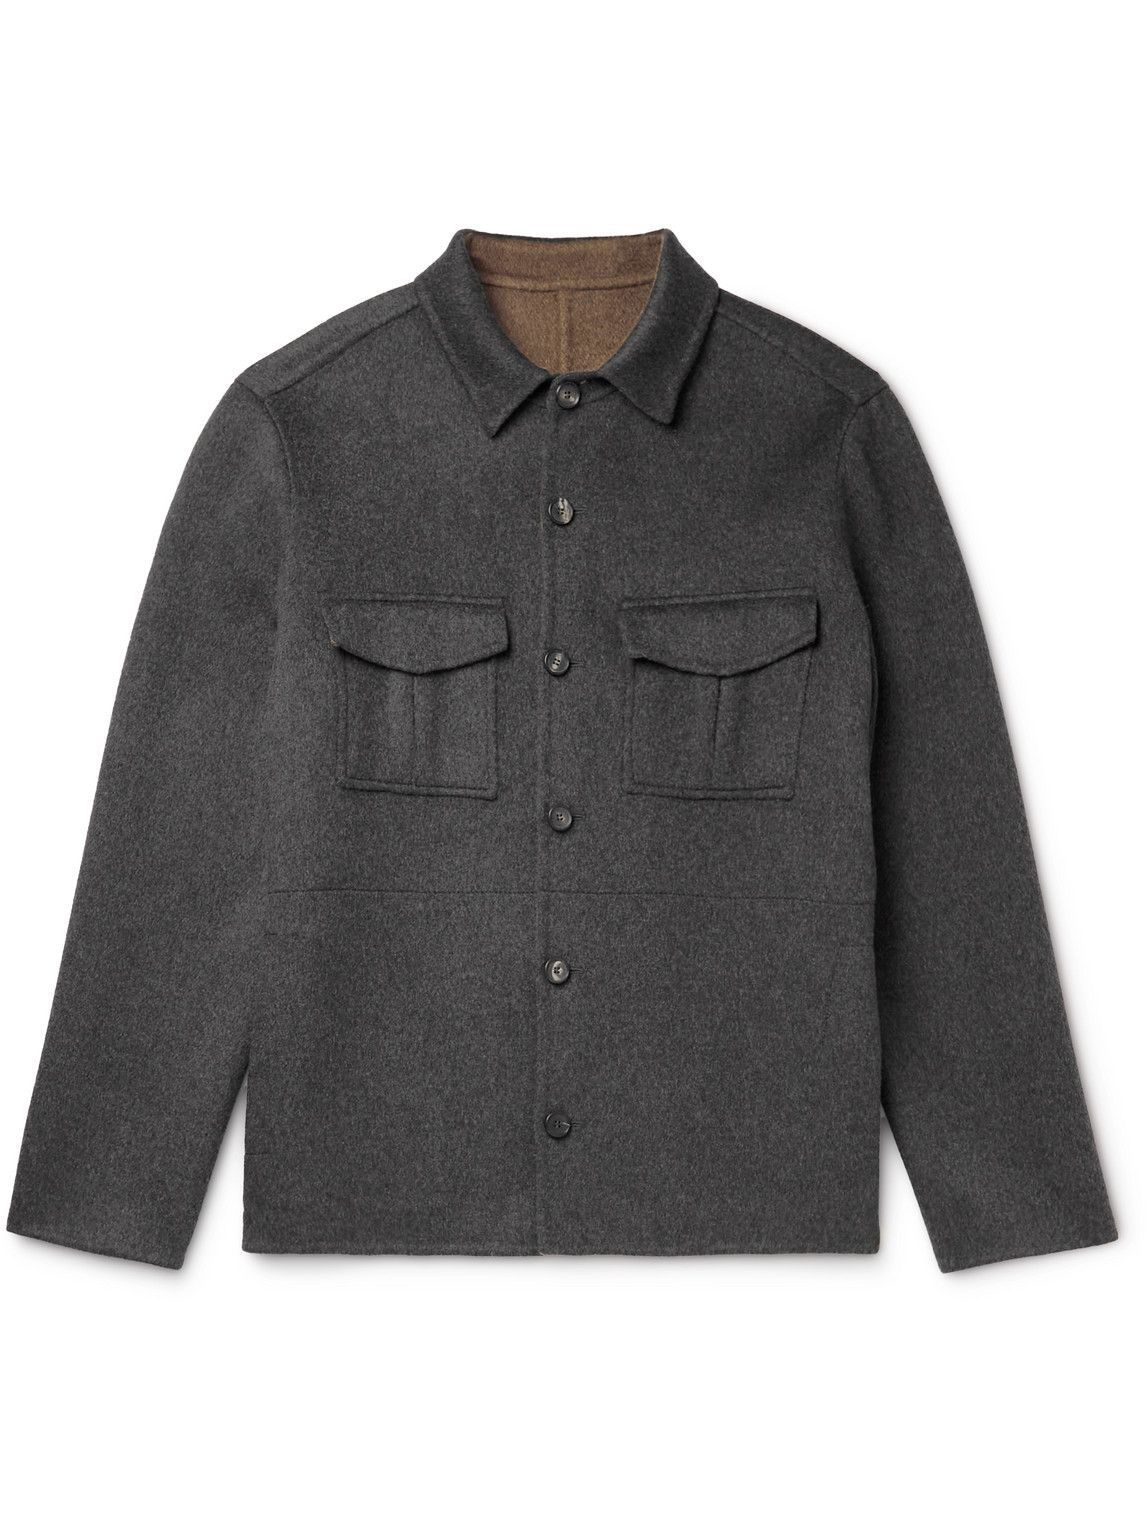 Thom Sweeney - Double-Faced Brushed-Cashmere Shirt Jacket - Unknown ...